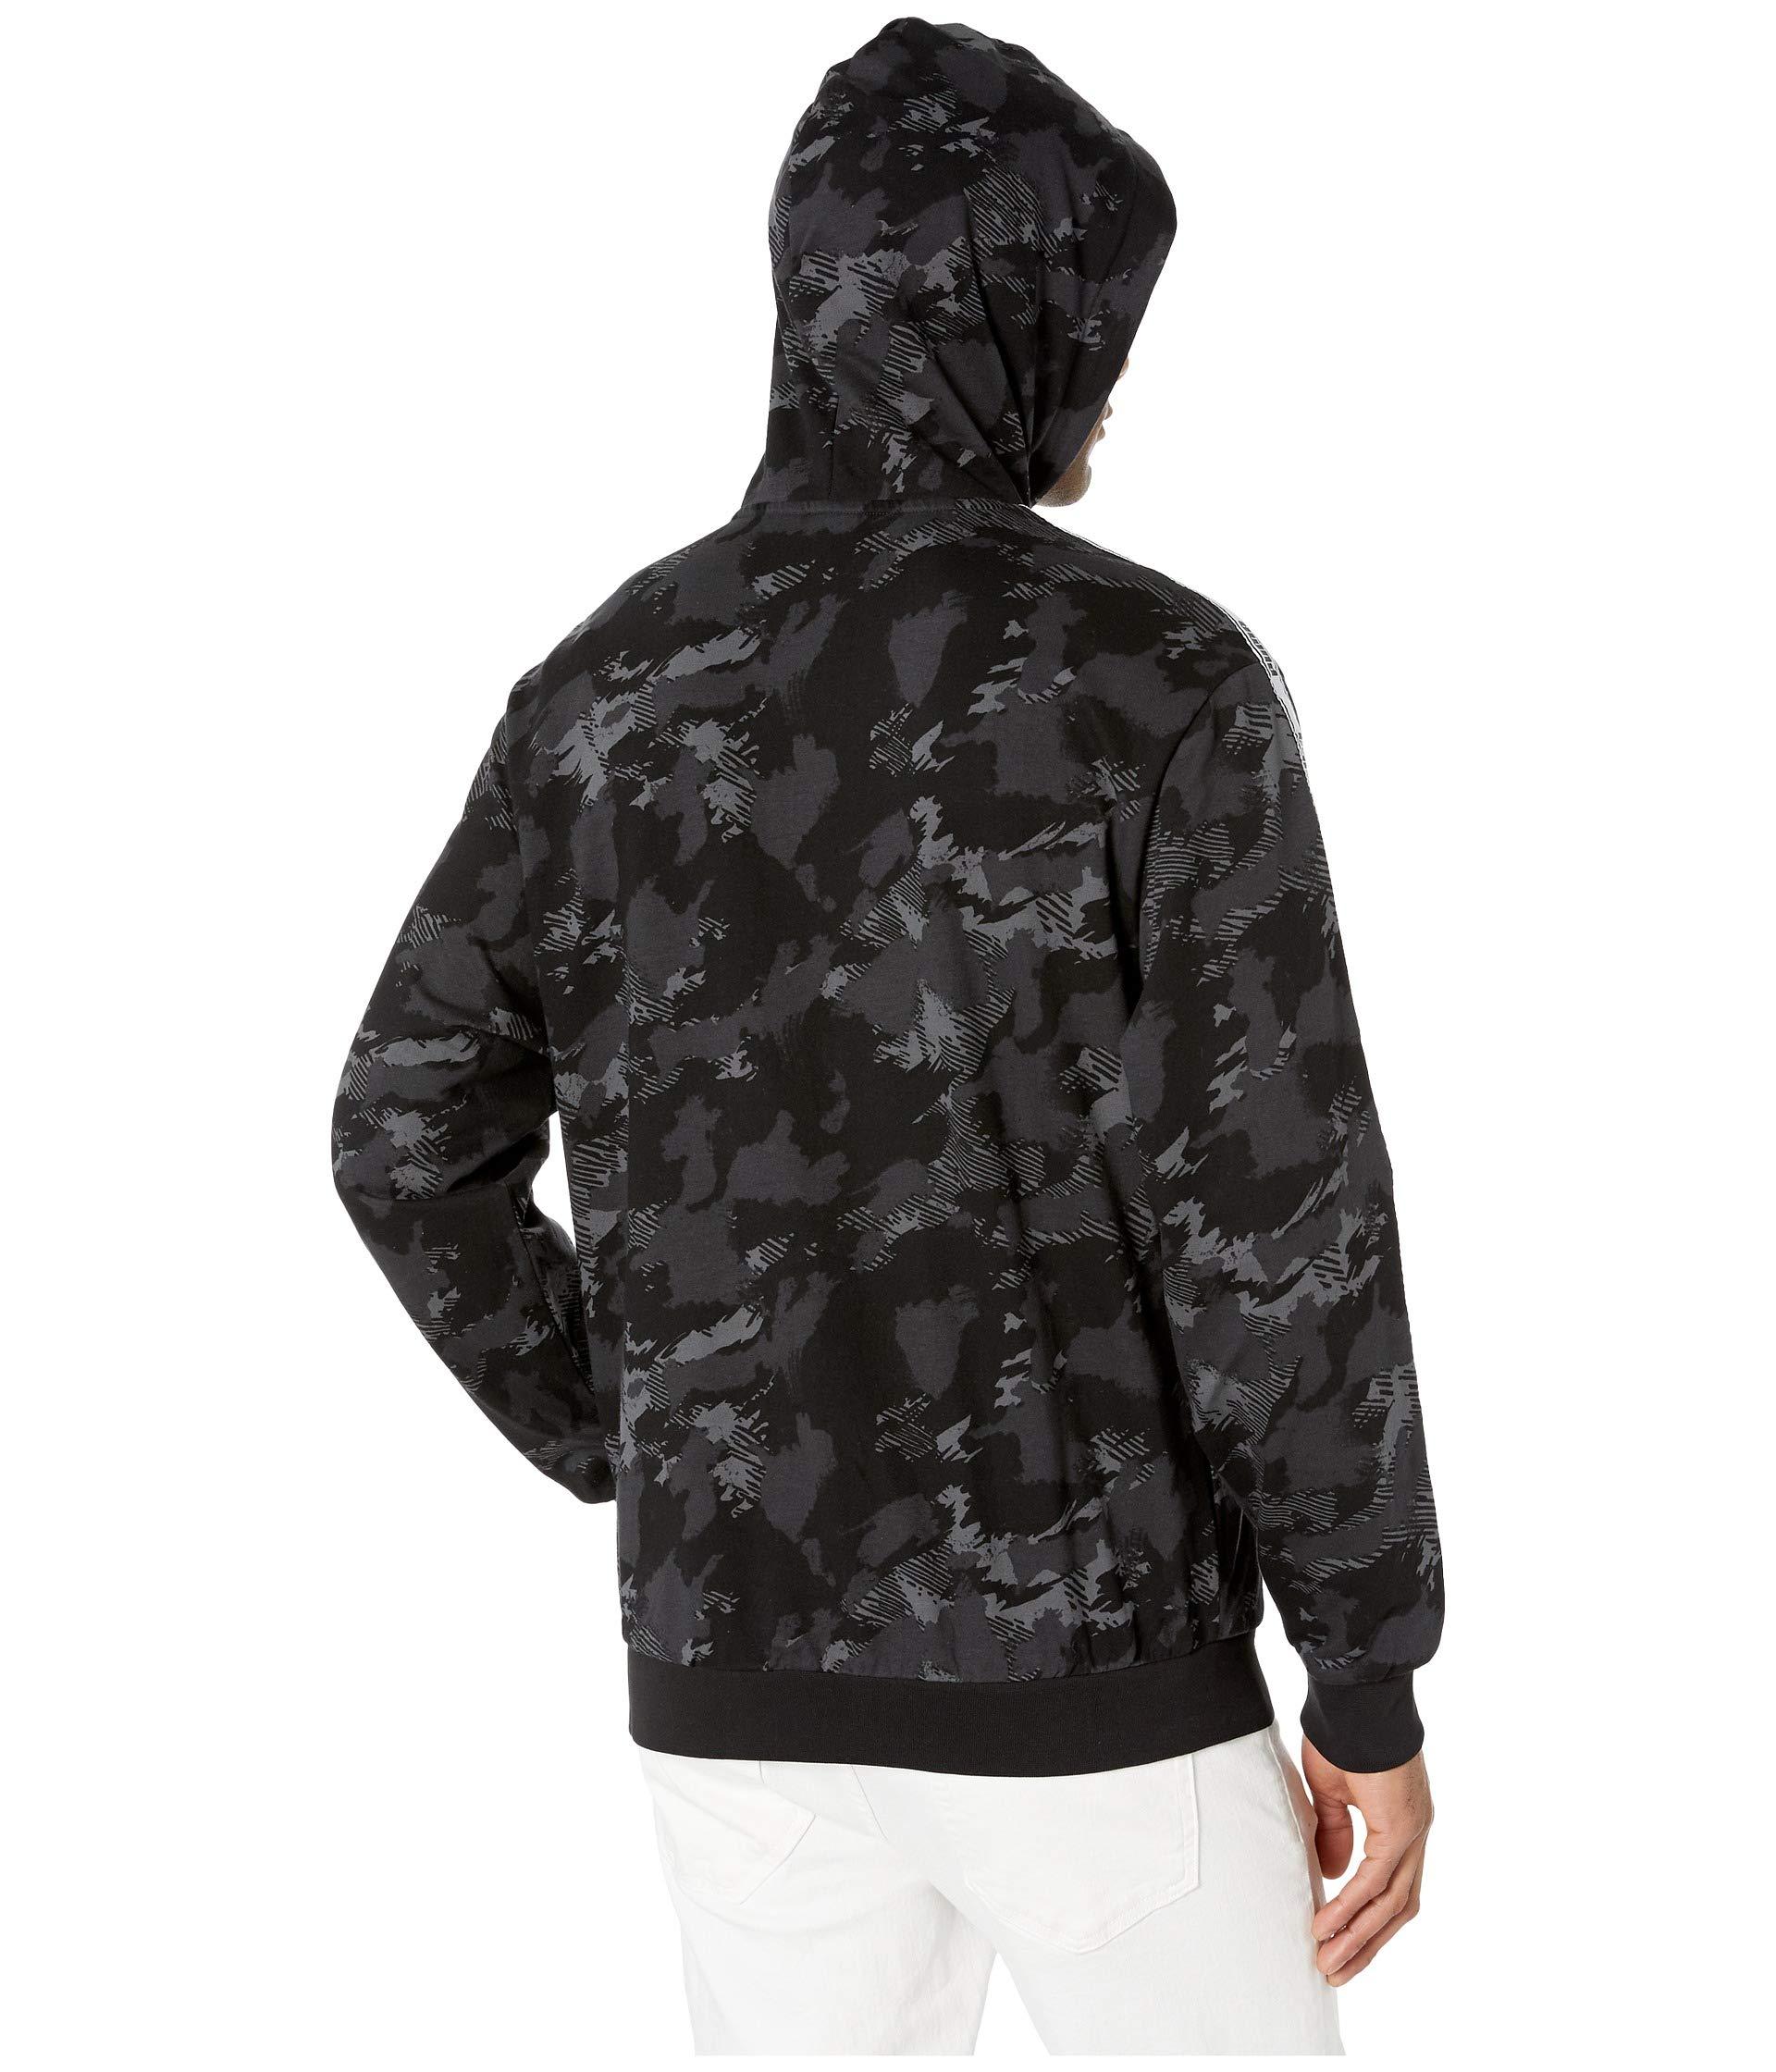 PUMA Cotton Camo Pack Aop Hoodie in Gray for Men - Lyst